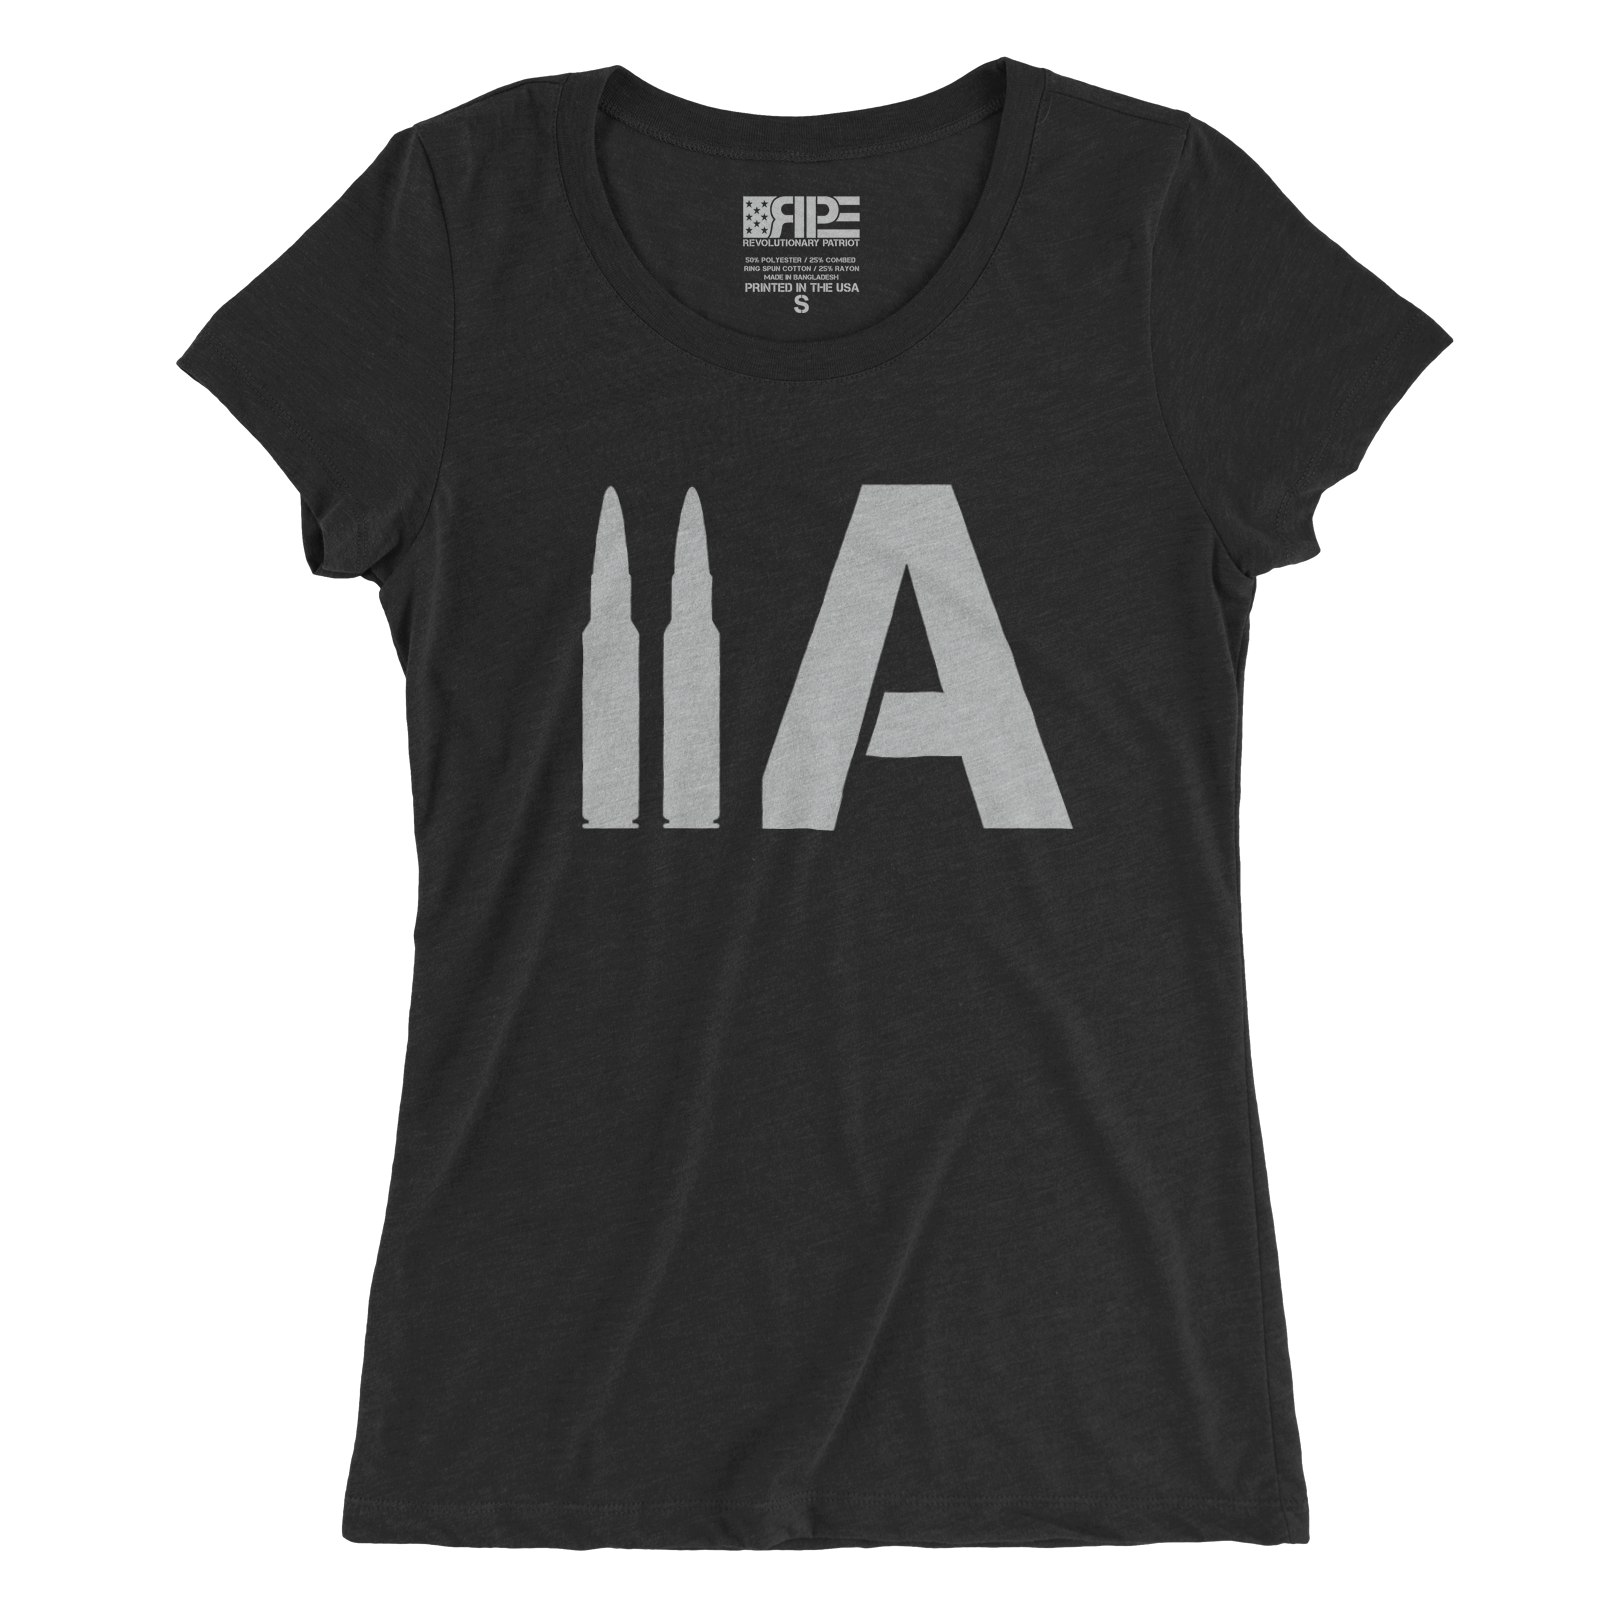 2A Women's - (Charcoal Triblend) - Revolutionary Patriot